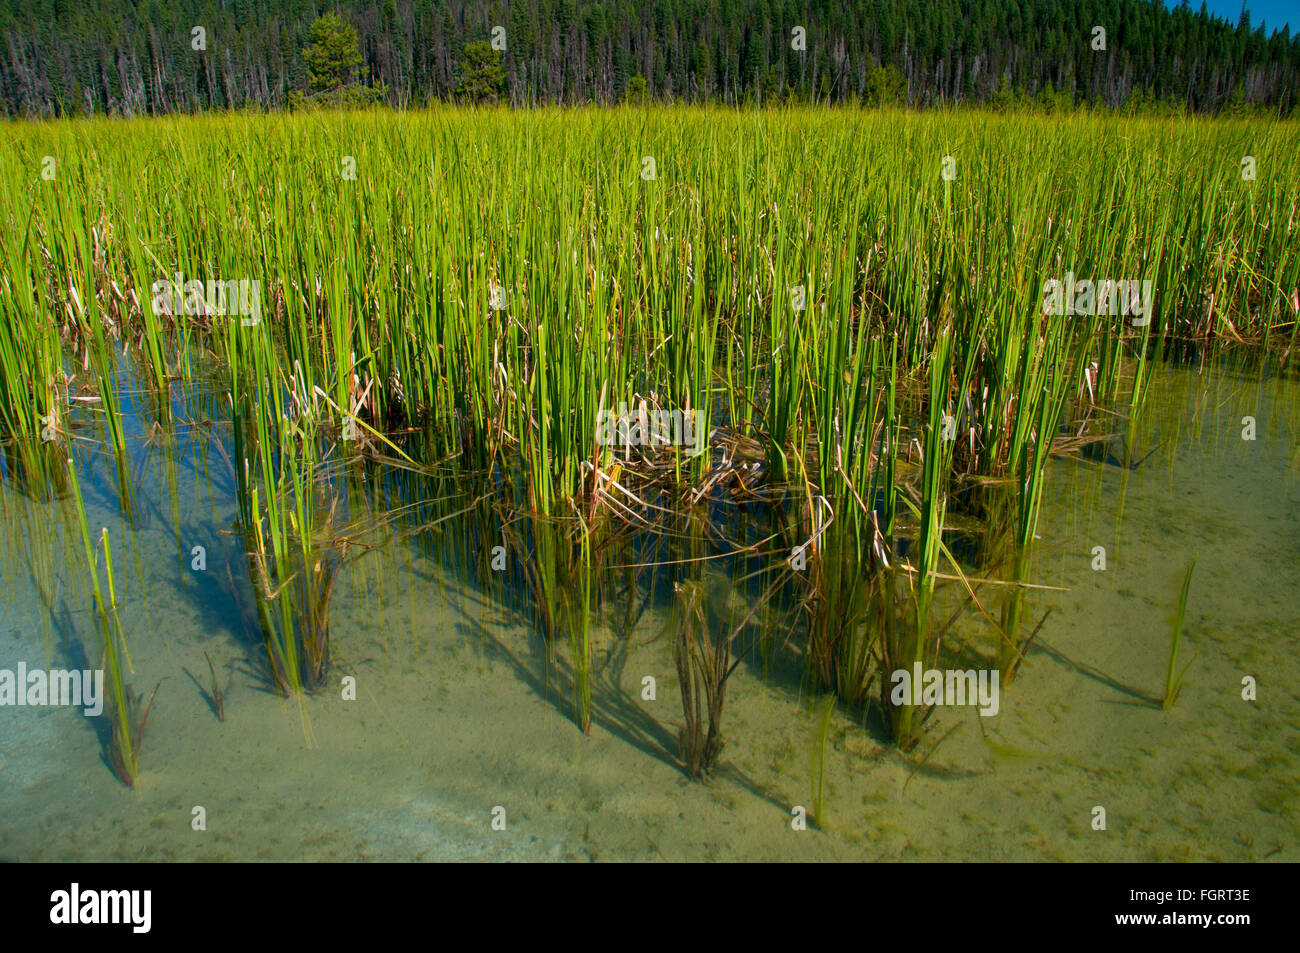 Hosmer Lake grasses, Cascade Lakes National Scenic Byway, Deschutes National Forest, Oregon Stock Photo